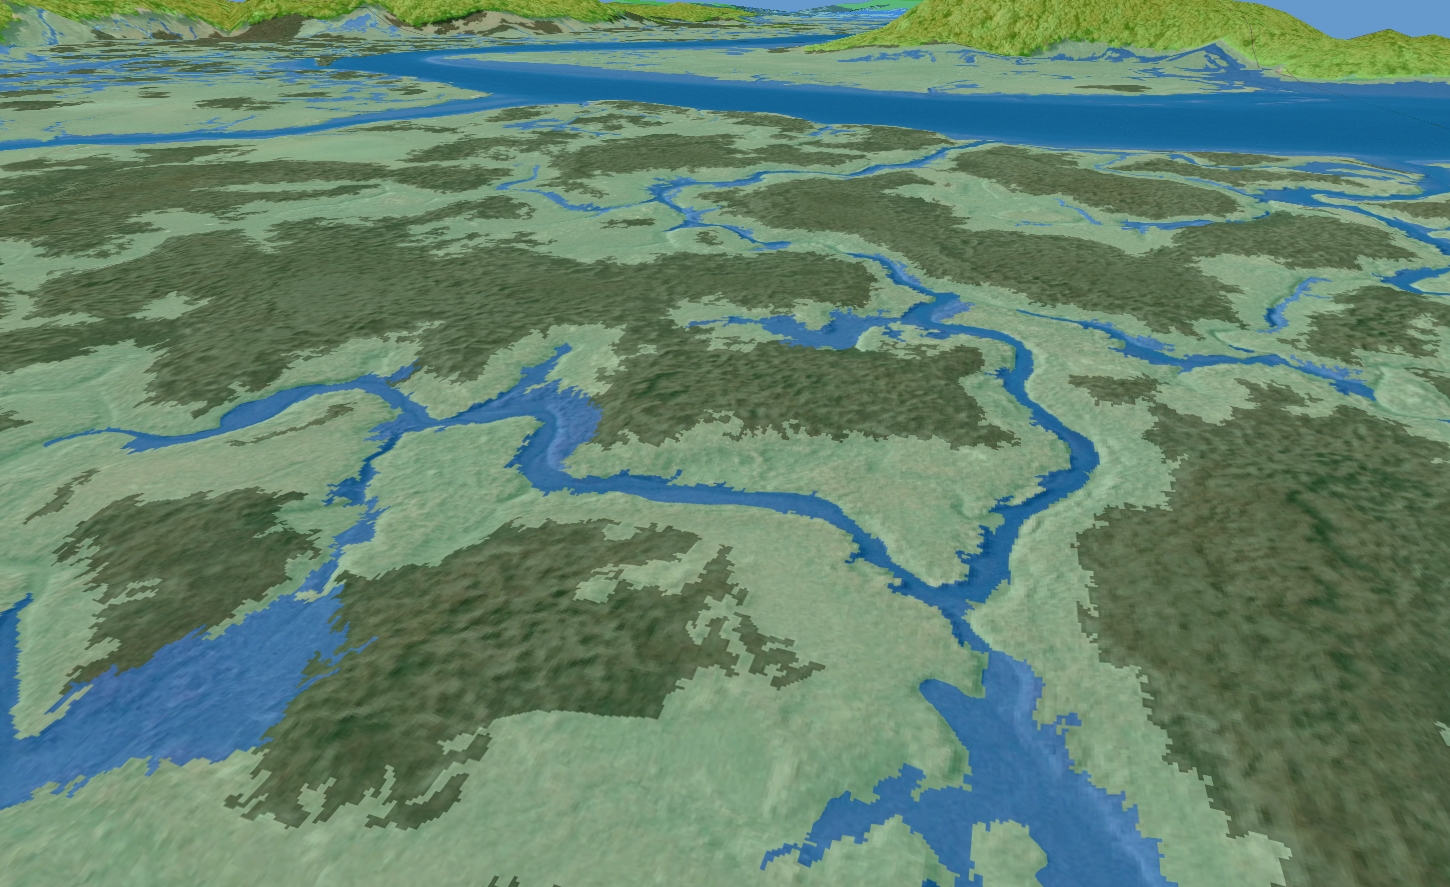 A 3D view of the salt marsh in TIMU using data produced in this project overlaid on top of the color infrared orthoimagery and lidar elevation data. The image shows Juncus (dark green), Spartina (light green), trees (bright green), and water (blue) at a 1:1,000 scale.